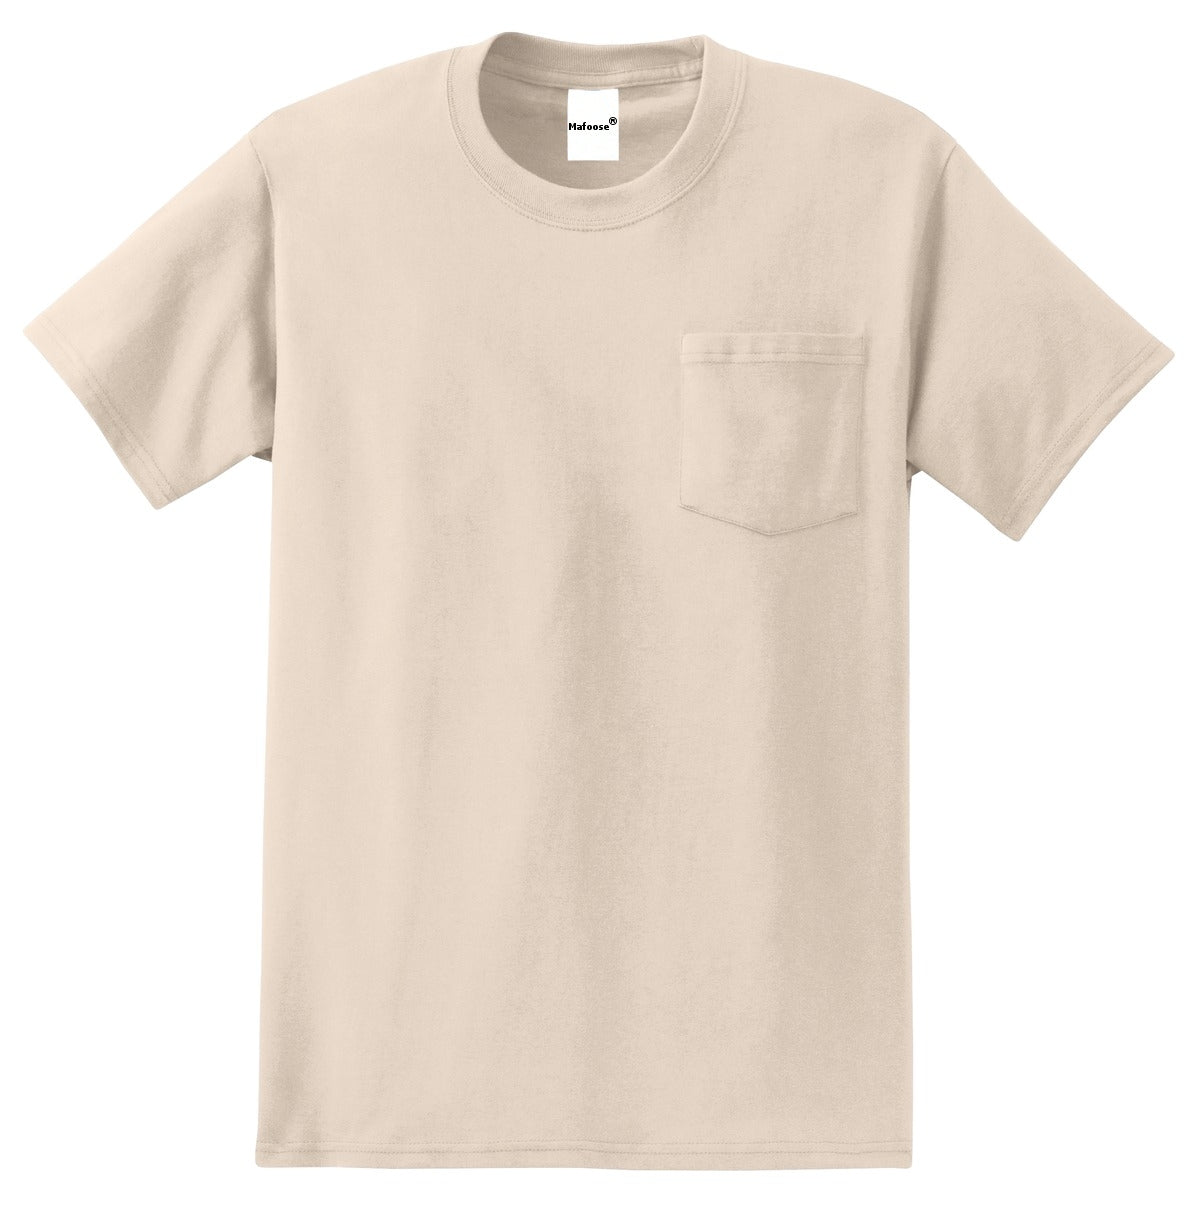 Men's Essential T Shirt with Pocket Natural